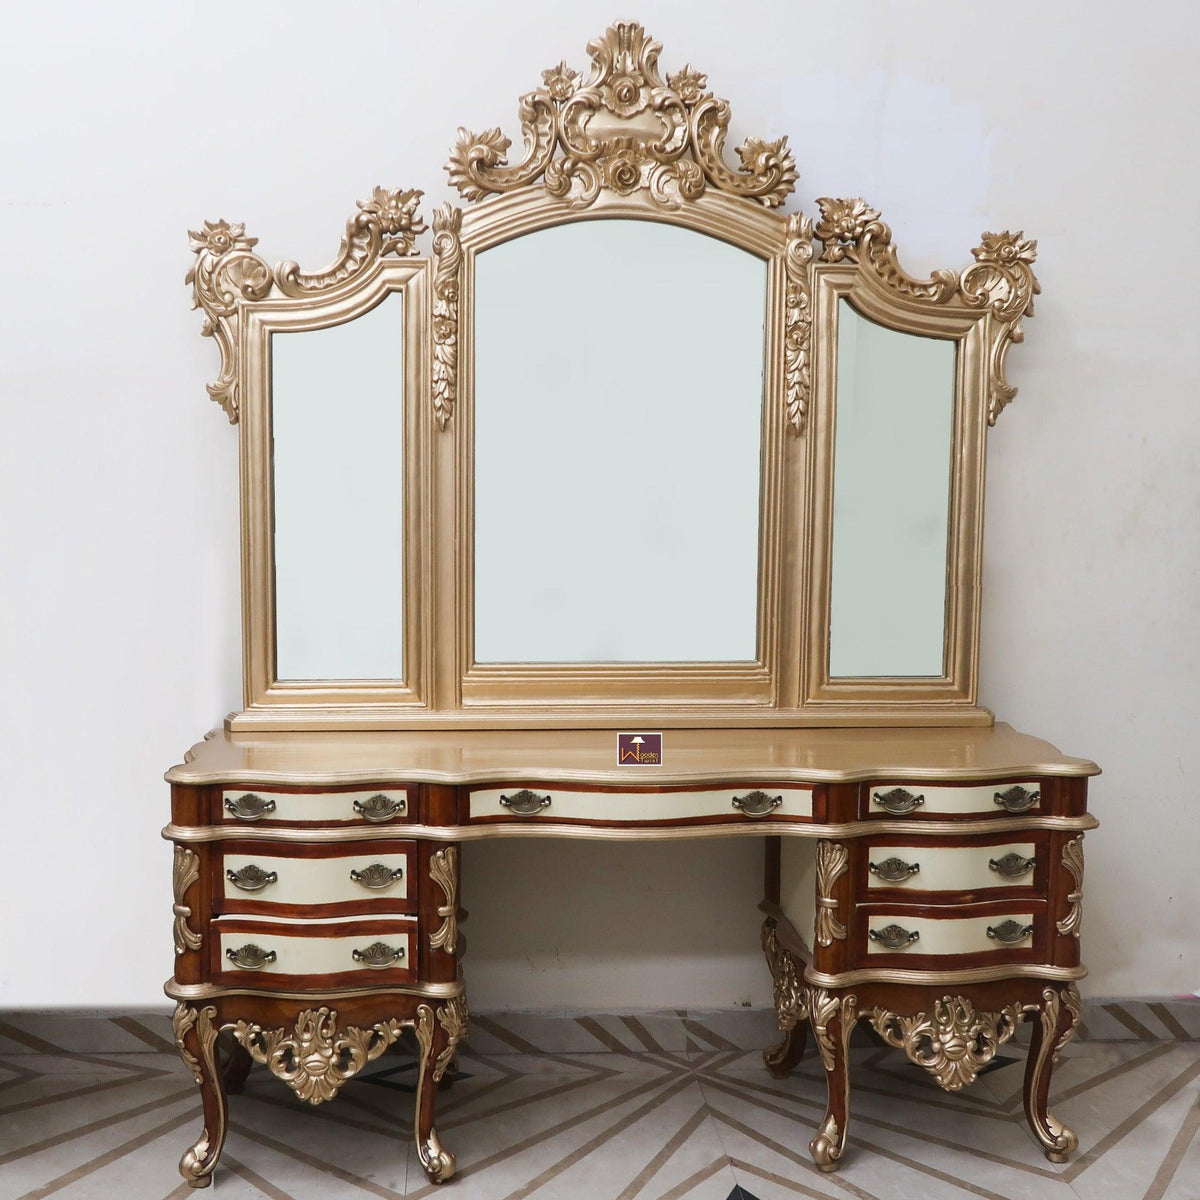 Dressing Tables: Shop Wooden Dressers & Mirrors Online in India